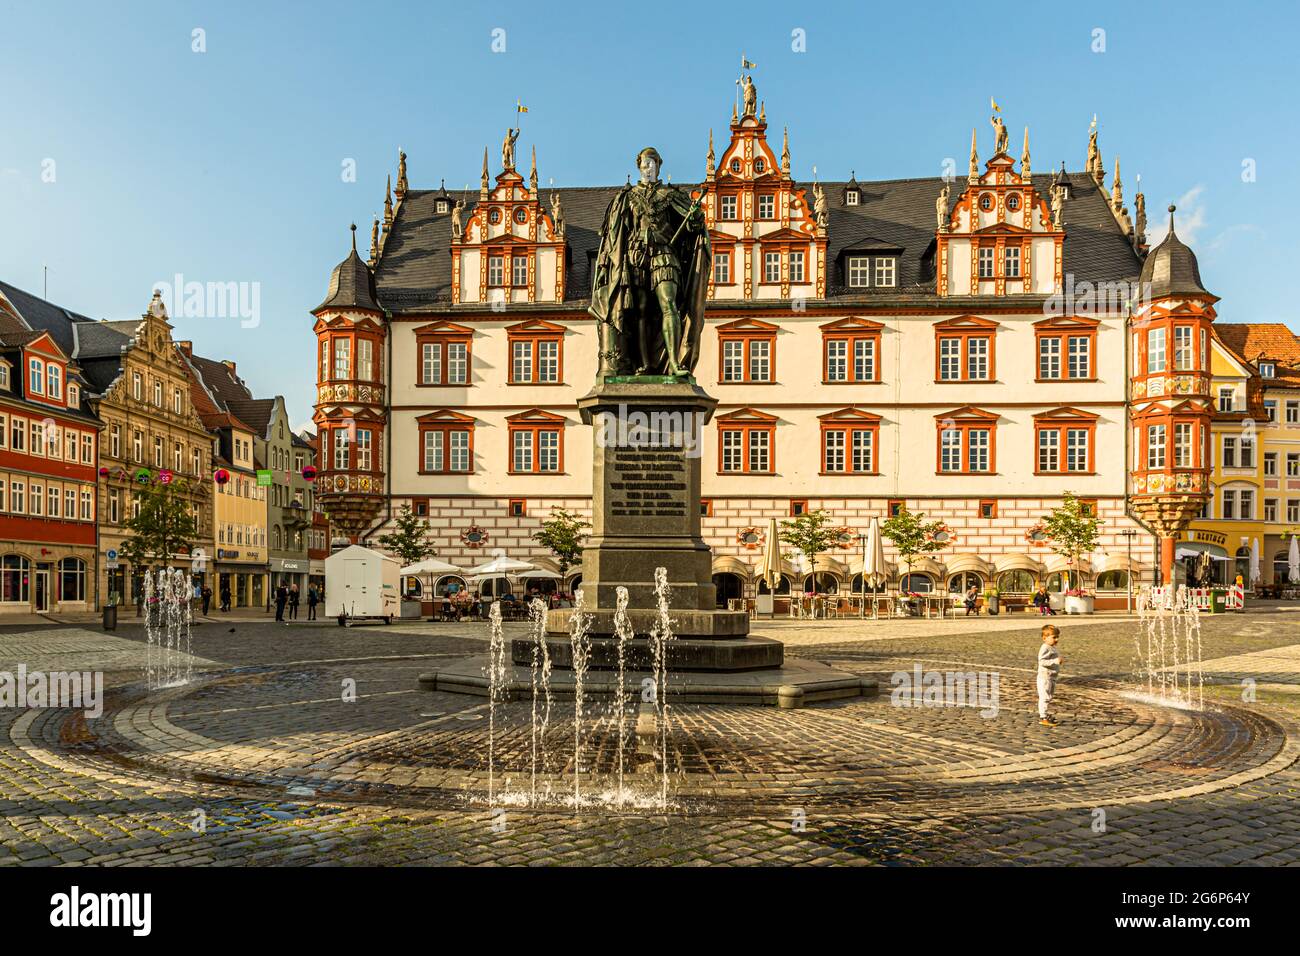 Monument of Prince Albert of Saxe-Coburg and Gotha in front of the Town House of Coburg, Germany Stock Photo